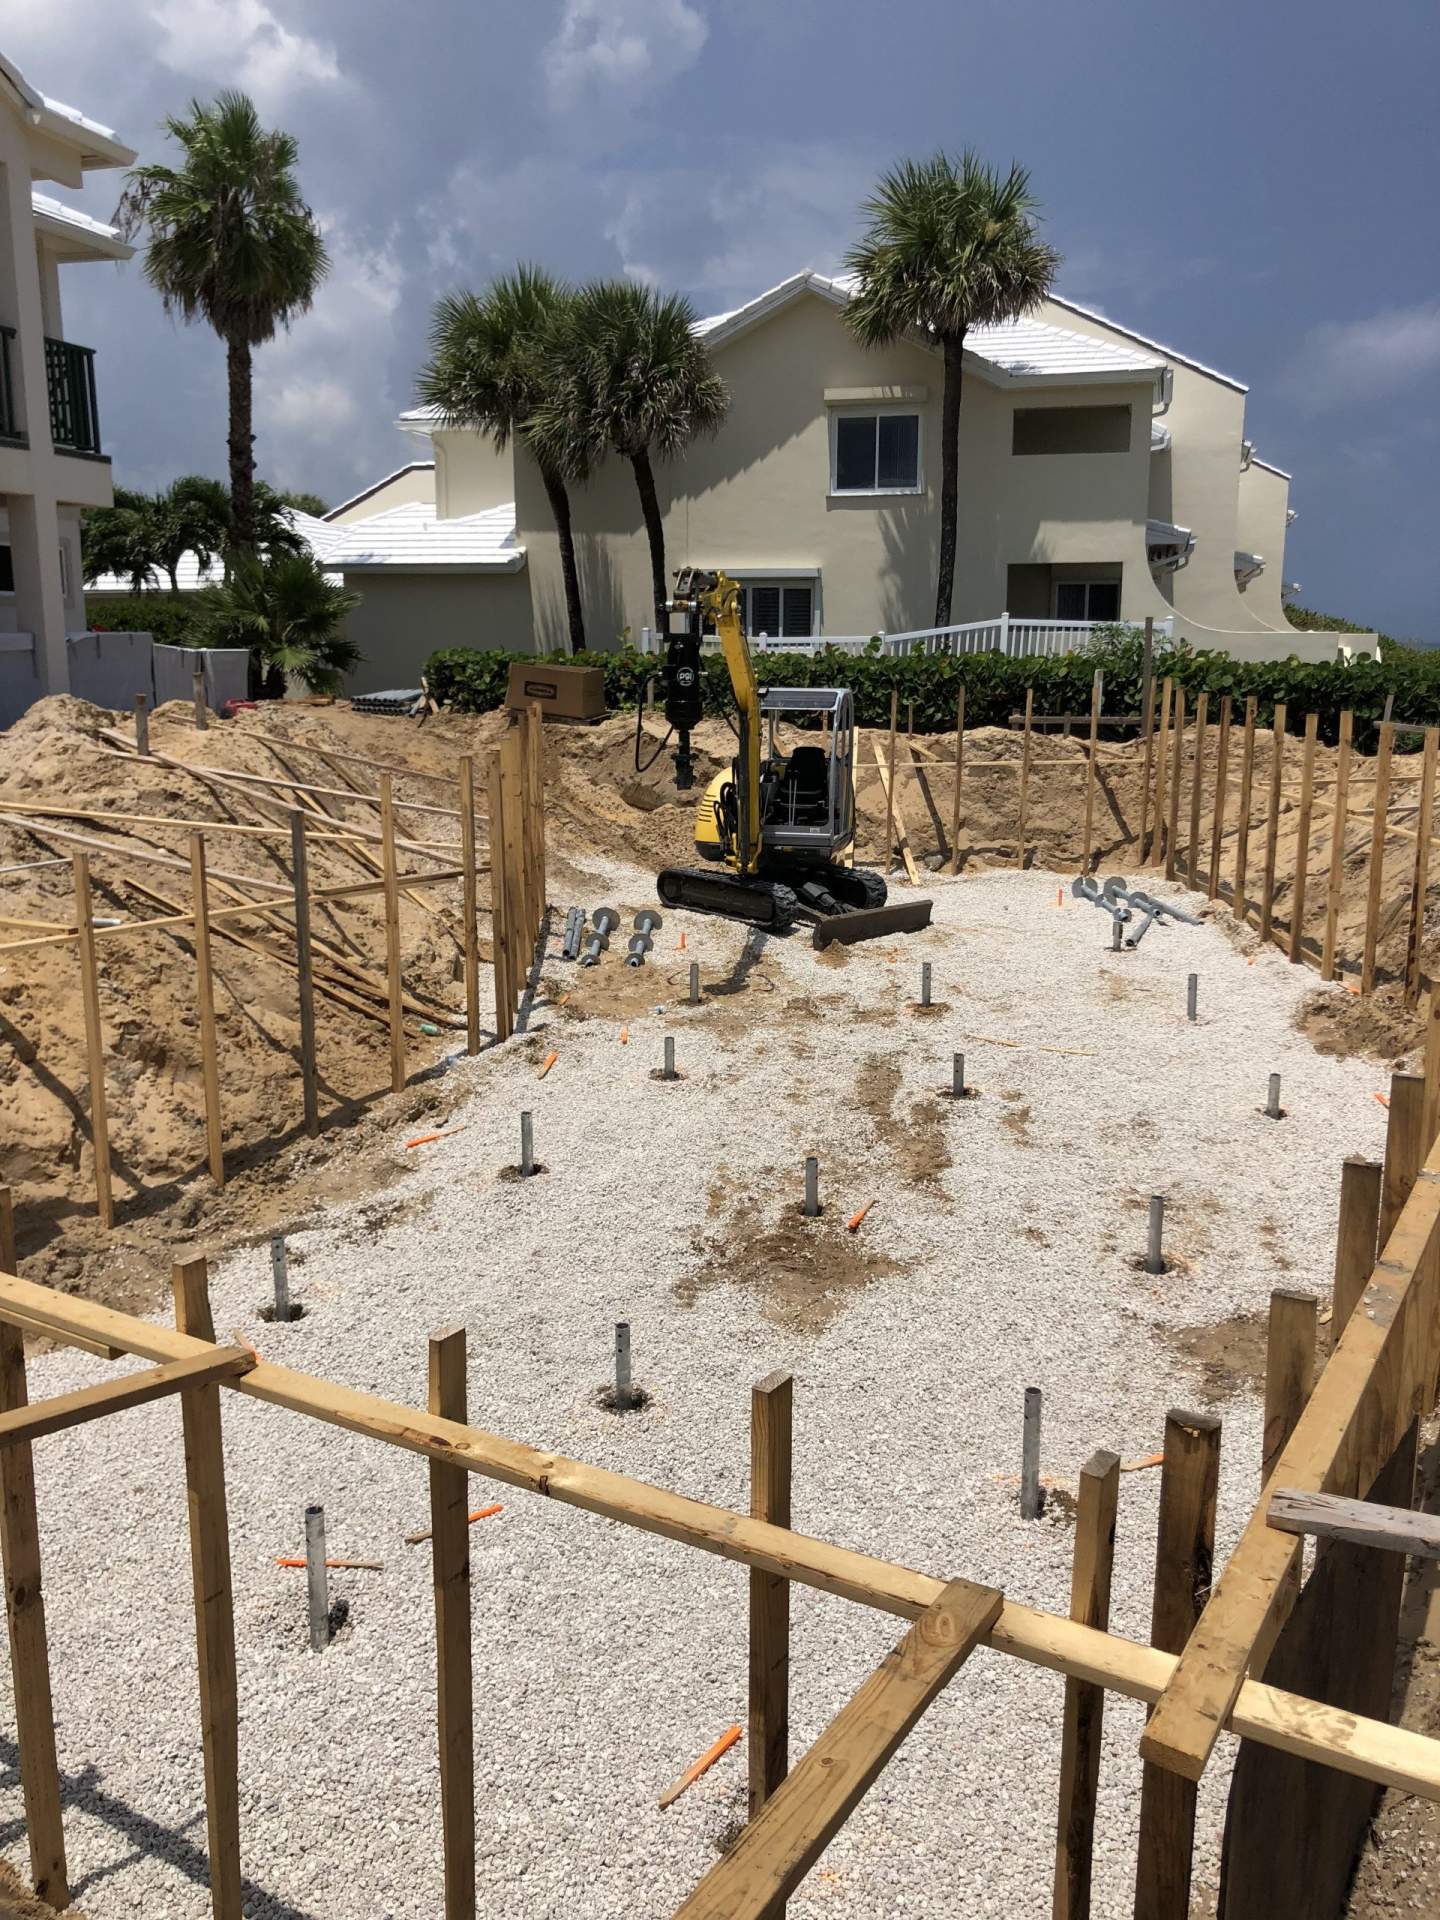 Home being built on the beach